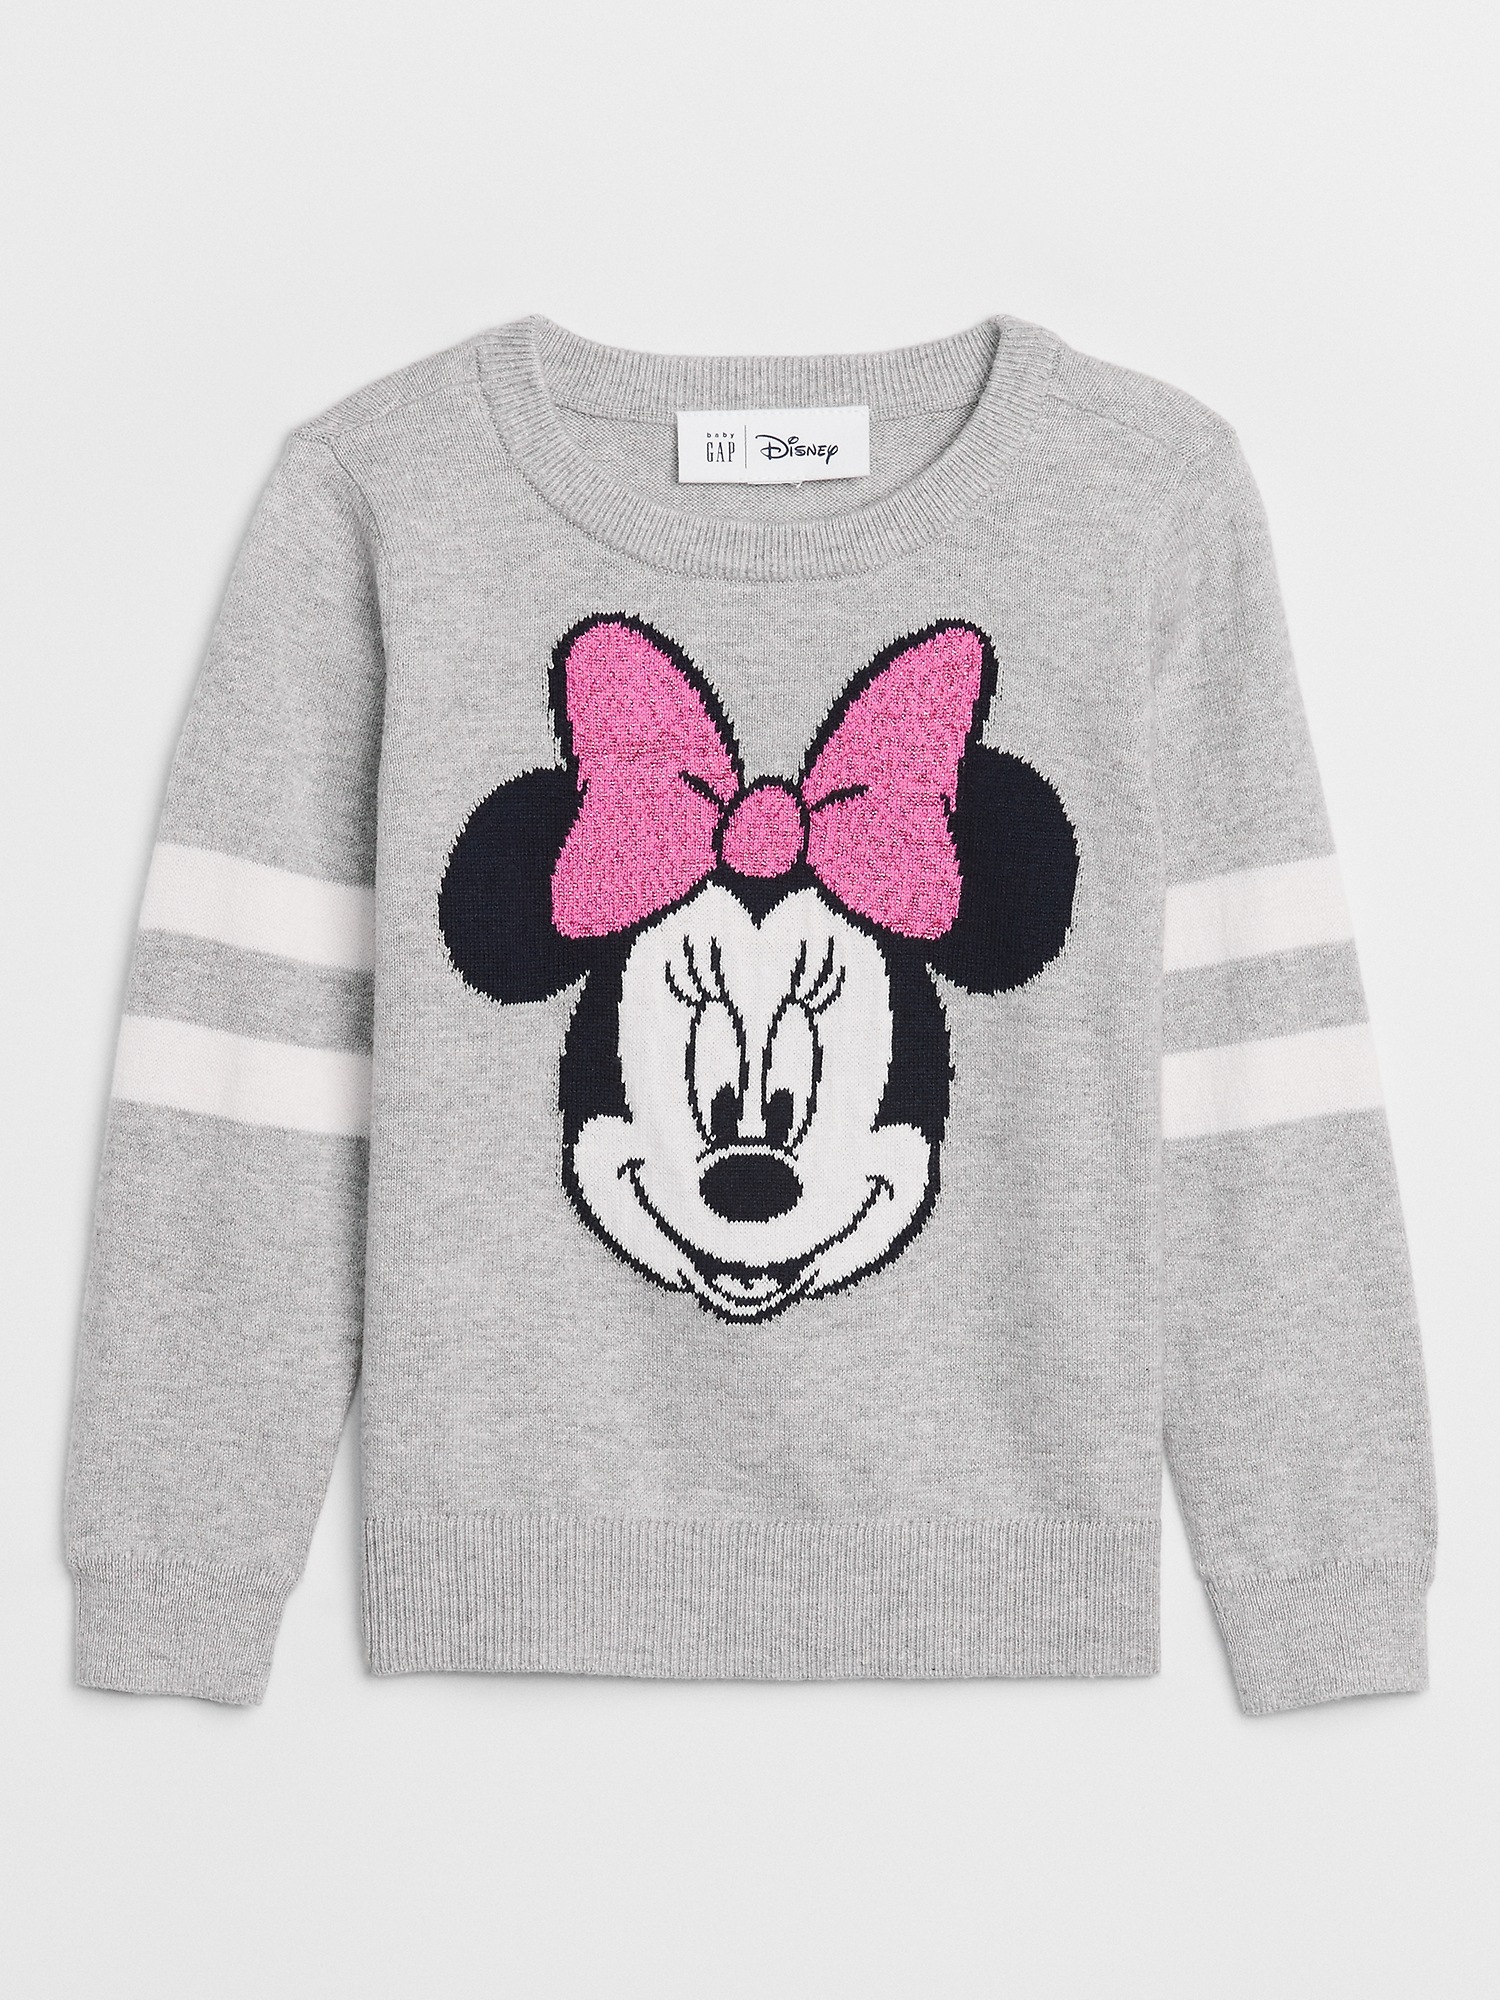 baby gap minnie mouse jacket